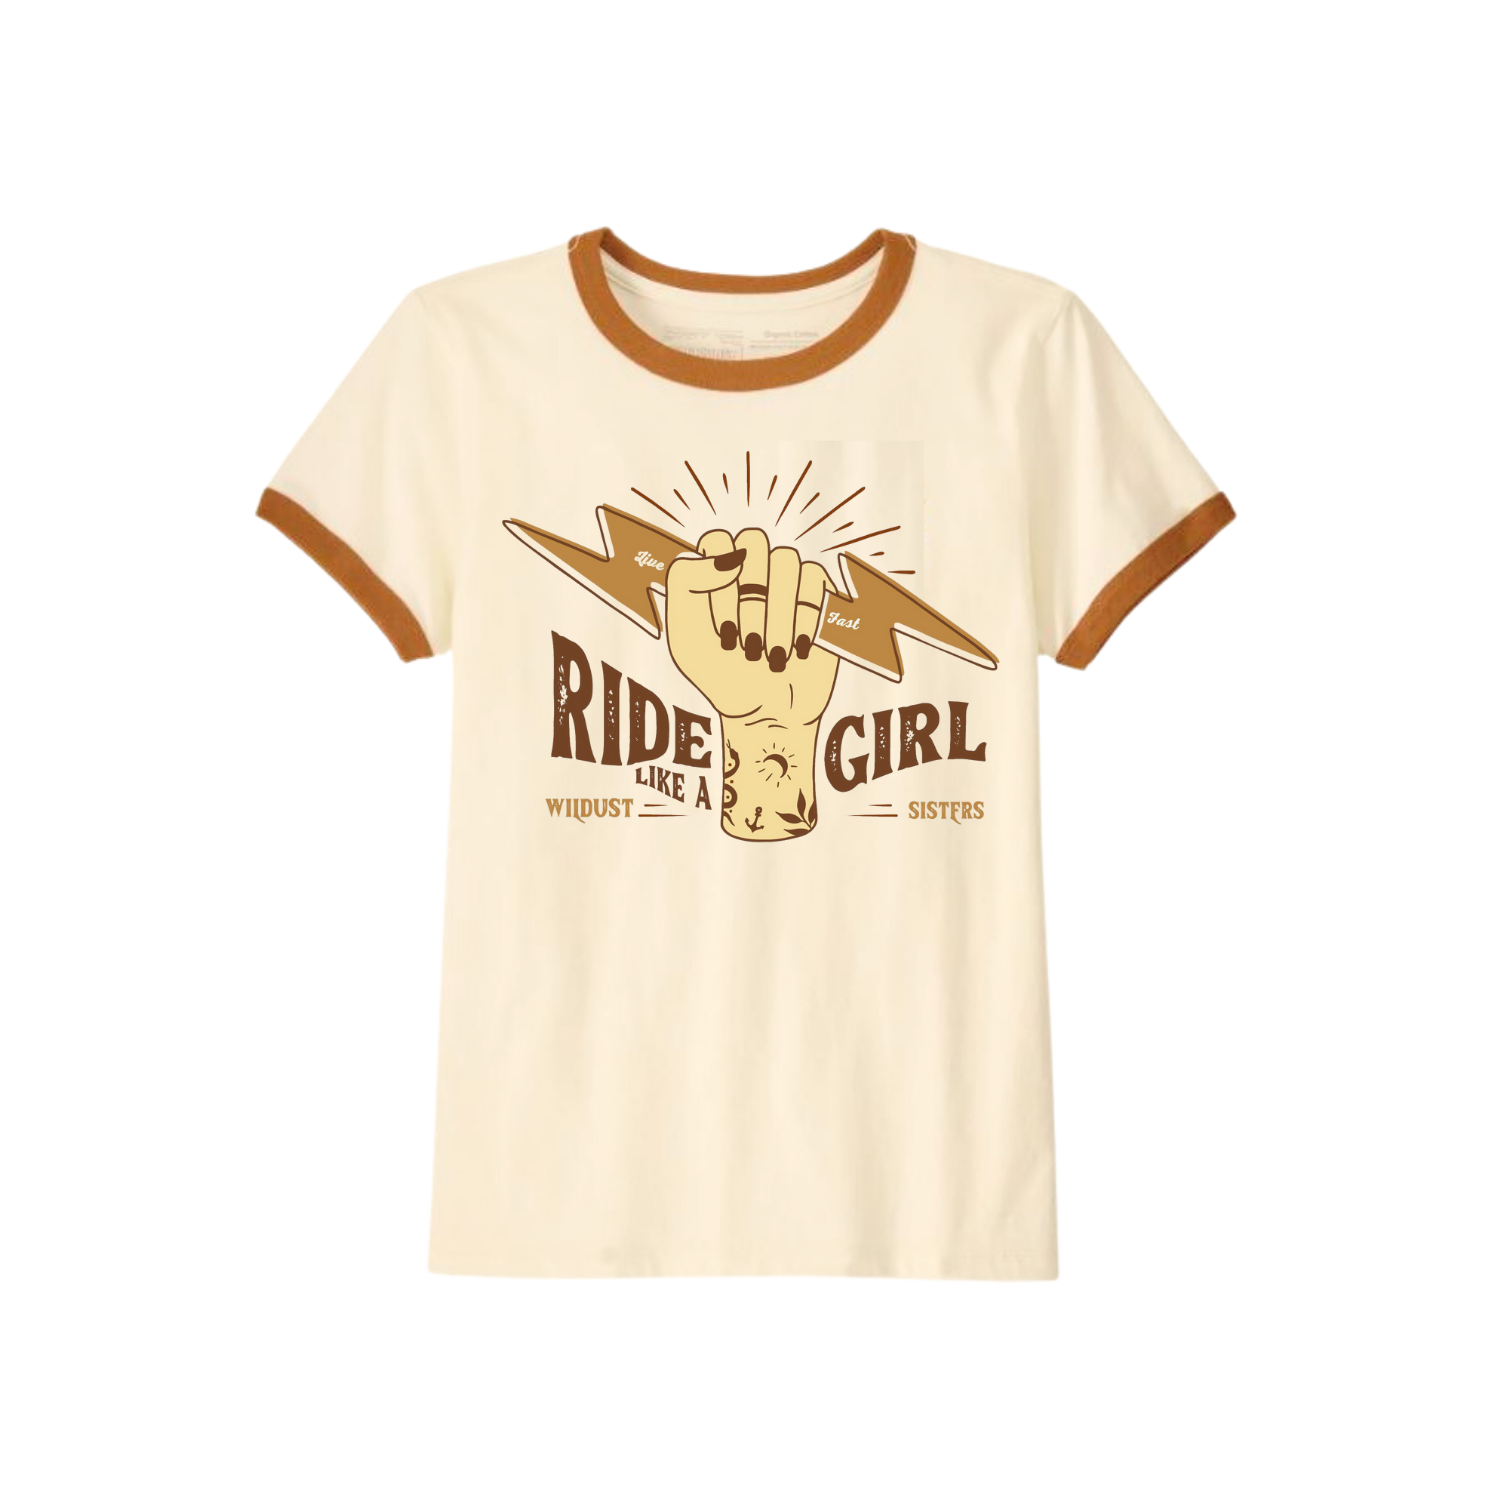 RIDE LIKE A GIRL retro style women's t-shirt from Wildust Sisters